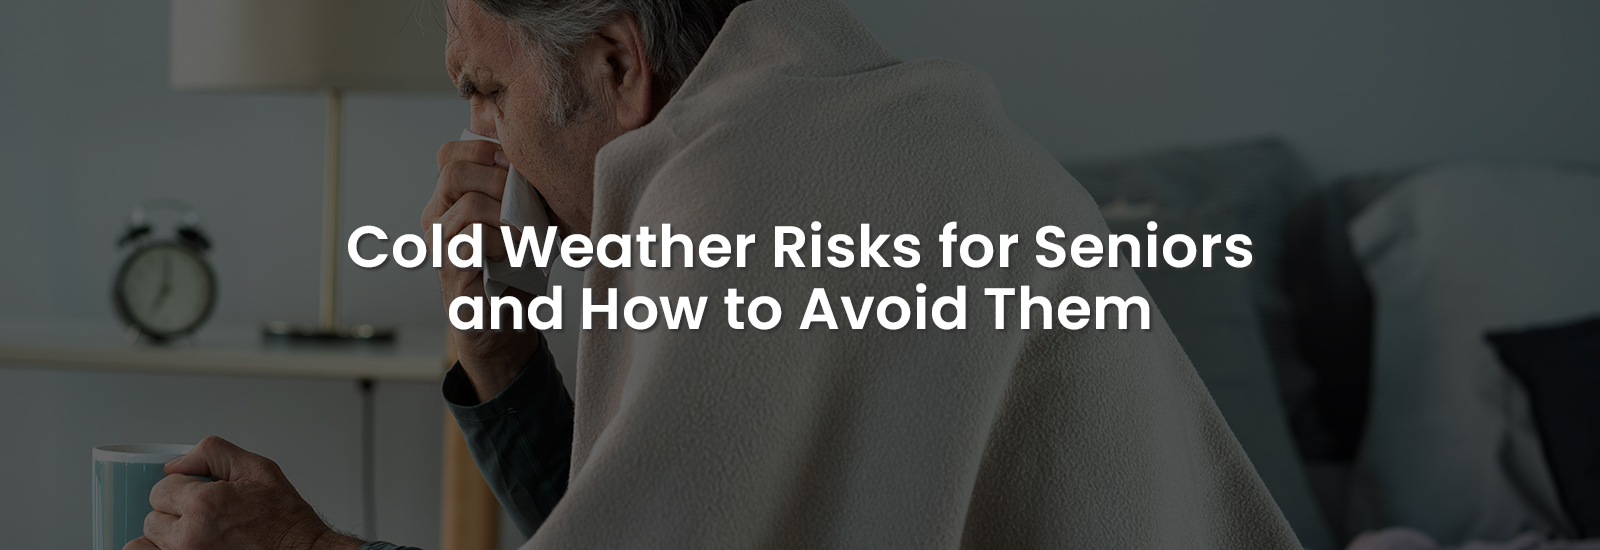 Cold Weather Risks for Seniors and How to Avoid Them | Banner Image